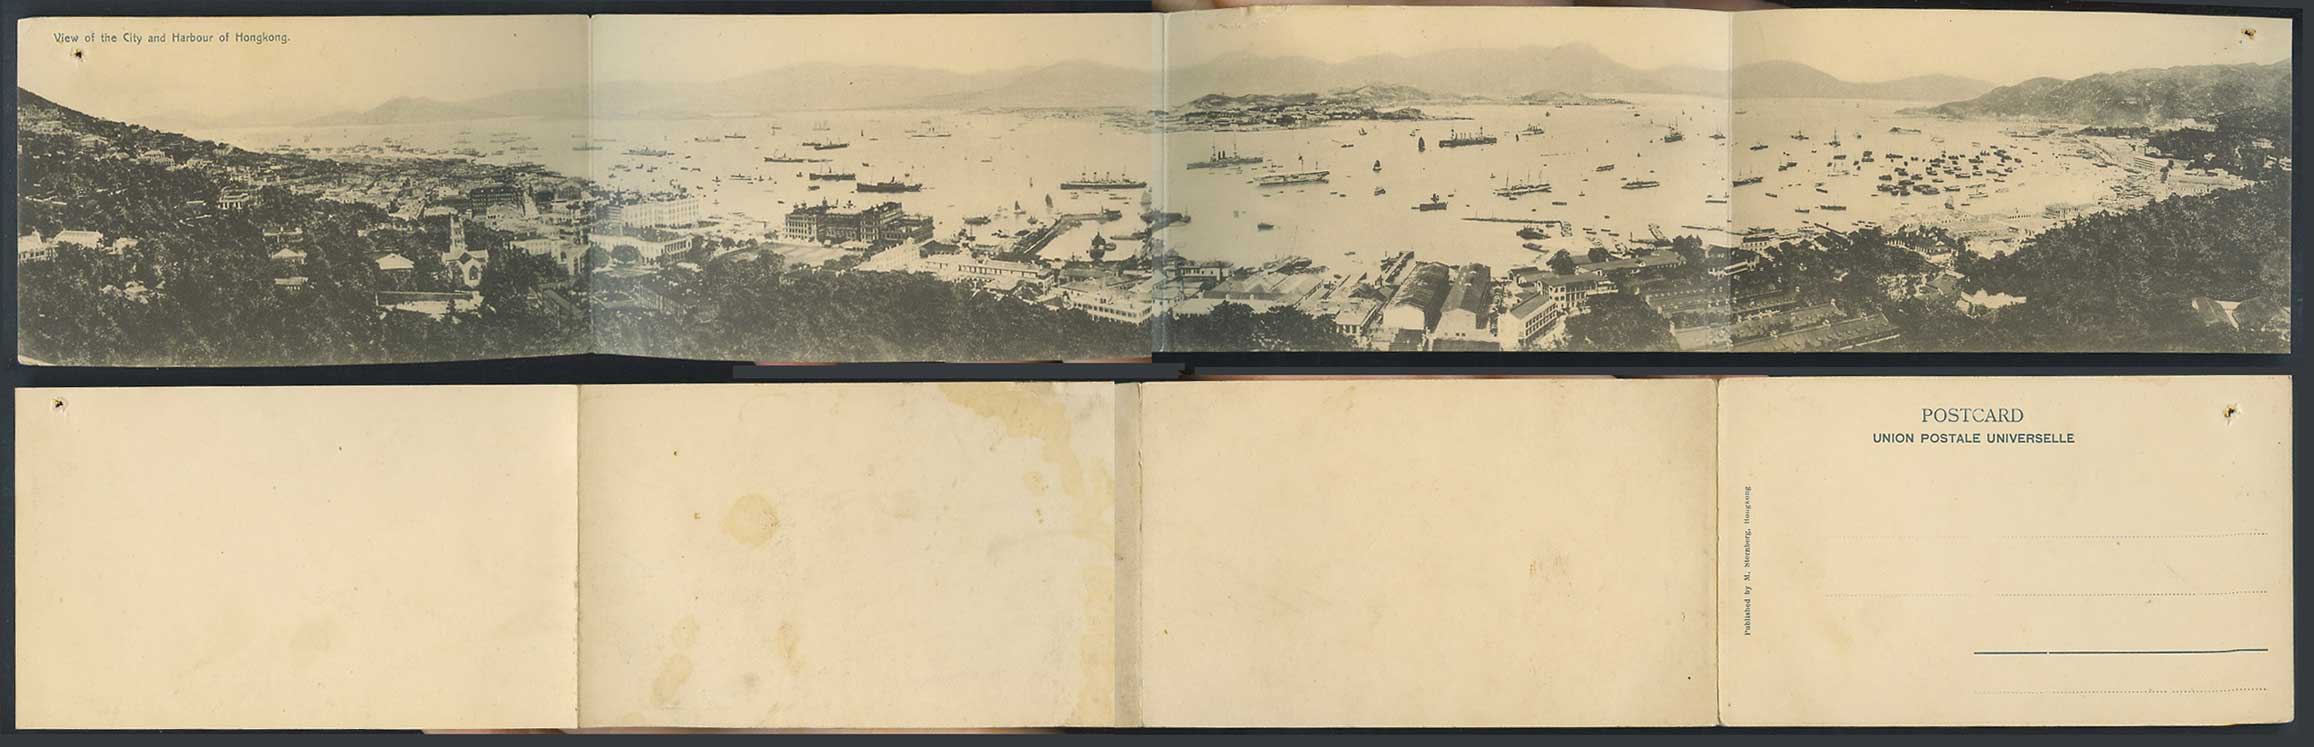 Hong Kong 4 Old Attached Postcards 1 Panorama View of City & Harbour Ships Boats